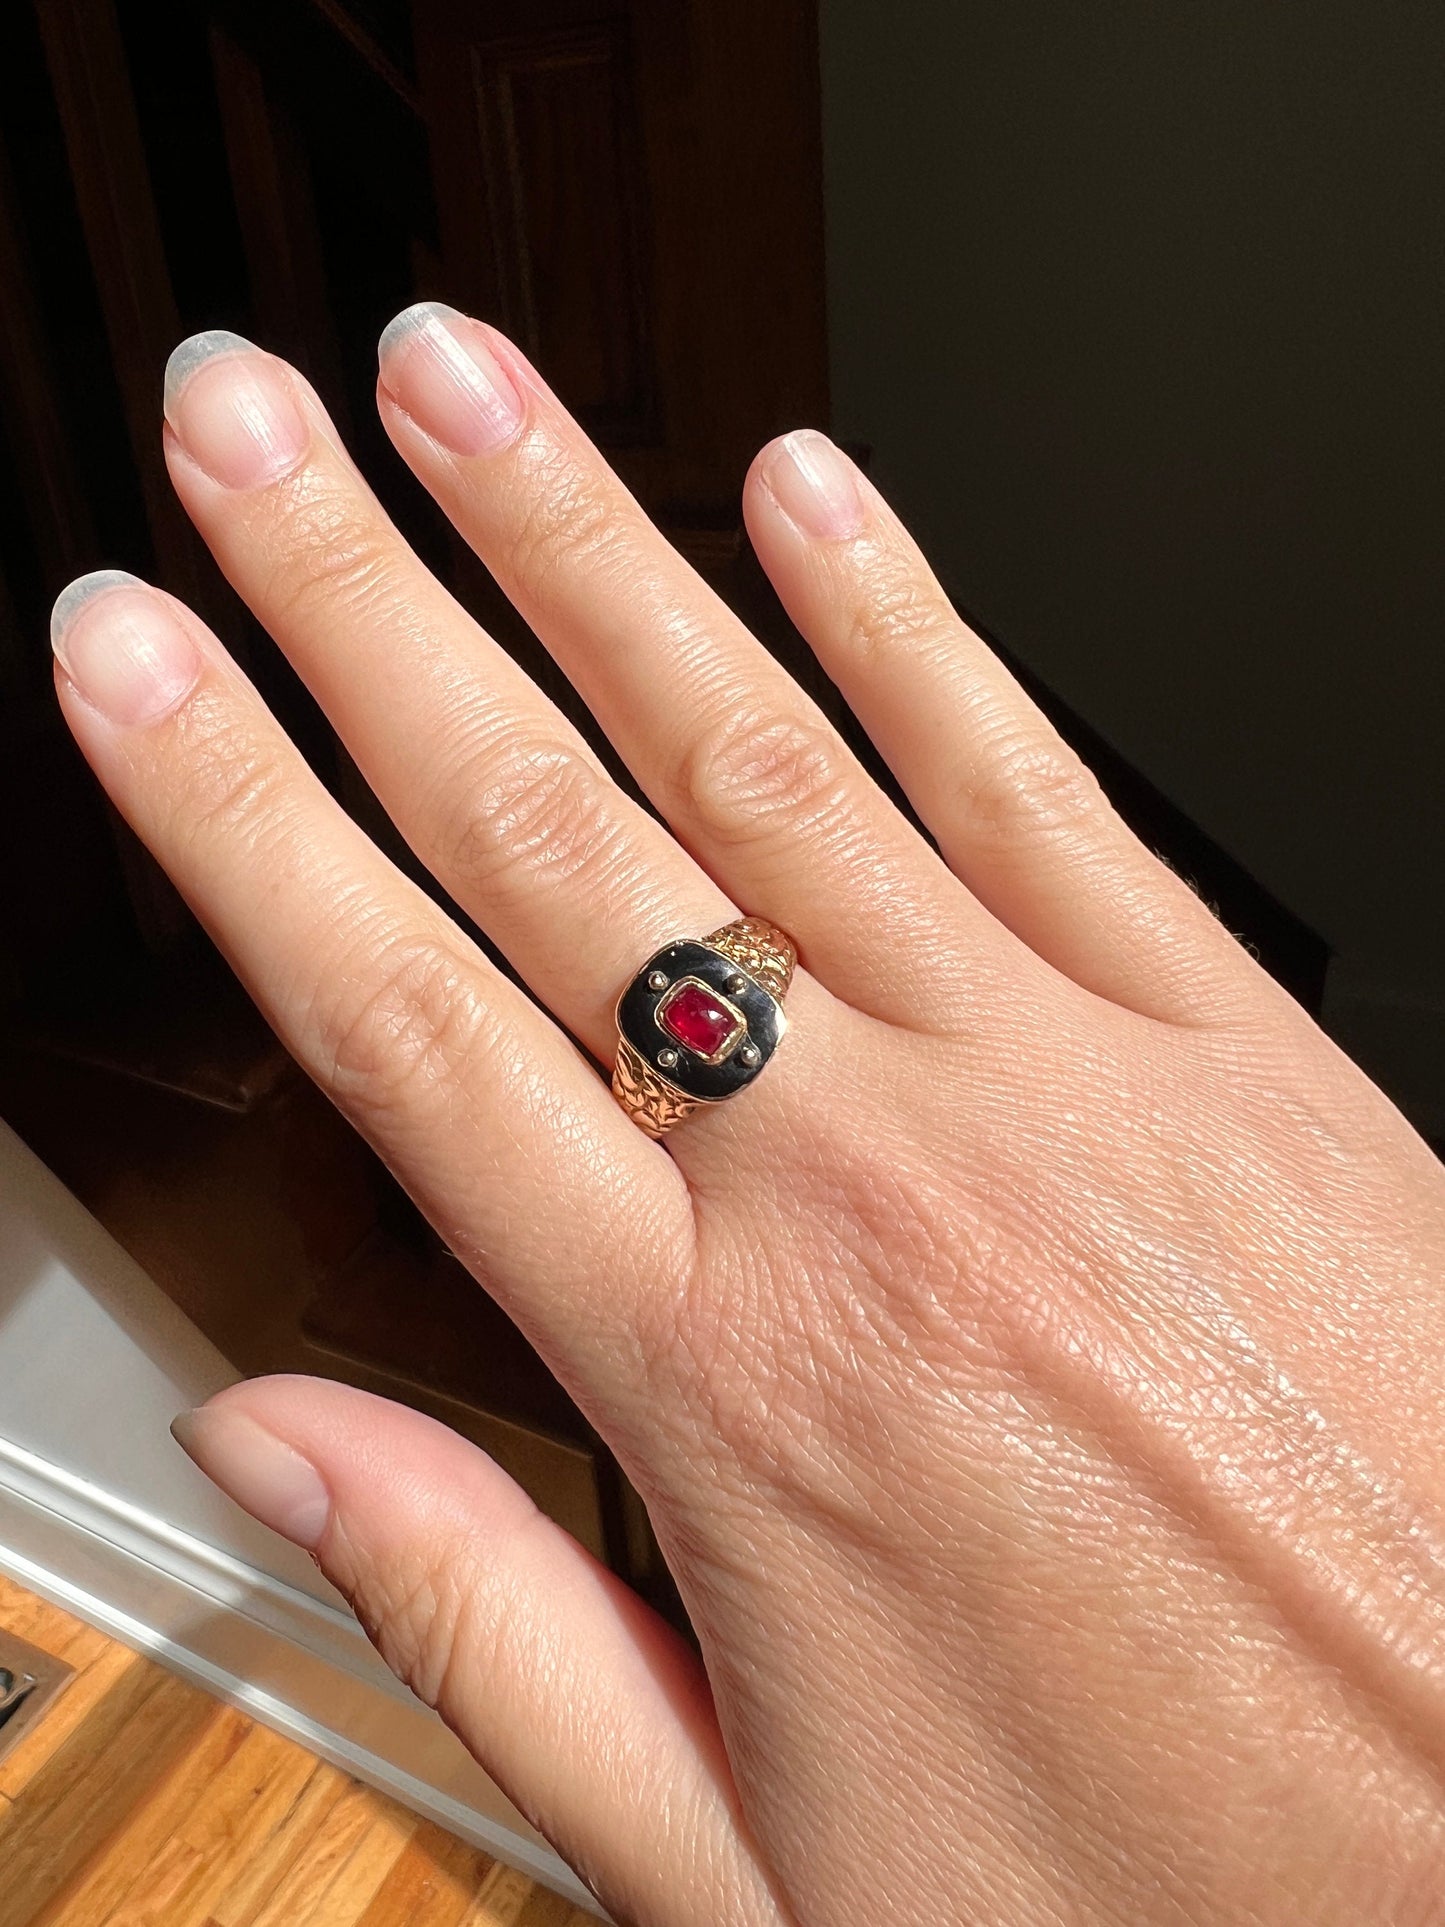 GEORGIAN Era Antique Ruby DATED 1818 Black Enamel Halo Rivets FLORAL Ring 14k Gold Bullseye Cabochon Embossed Mourning Band Red Victorian